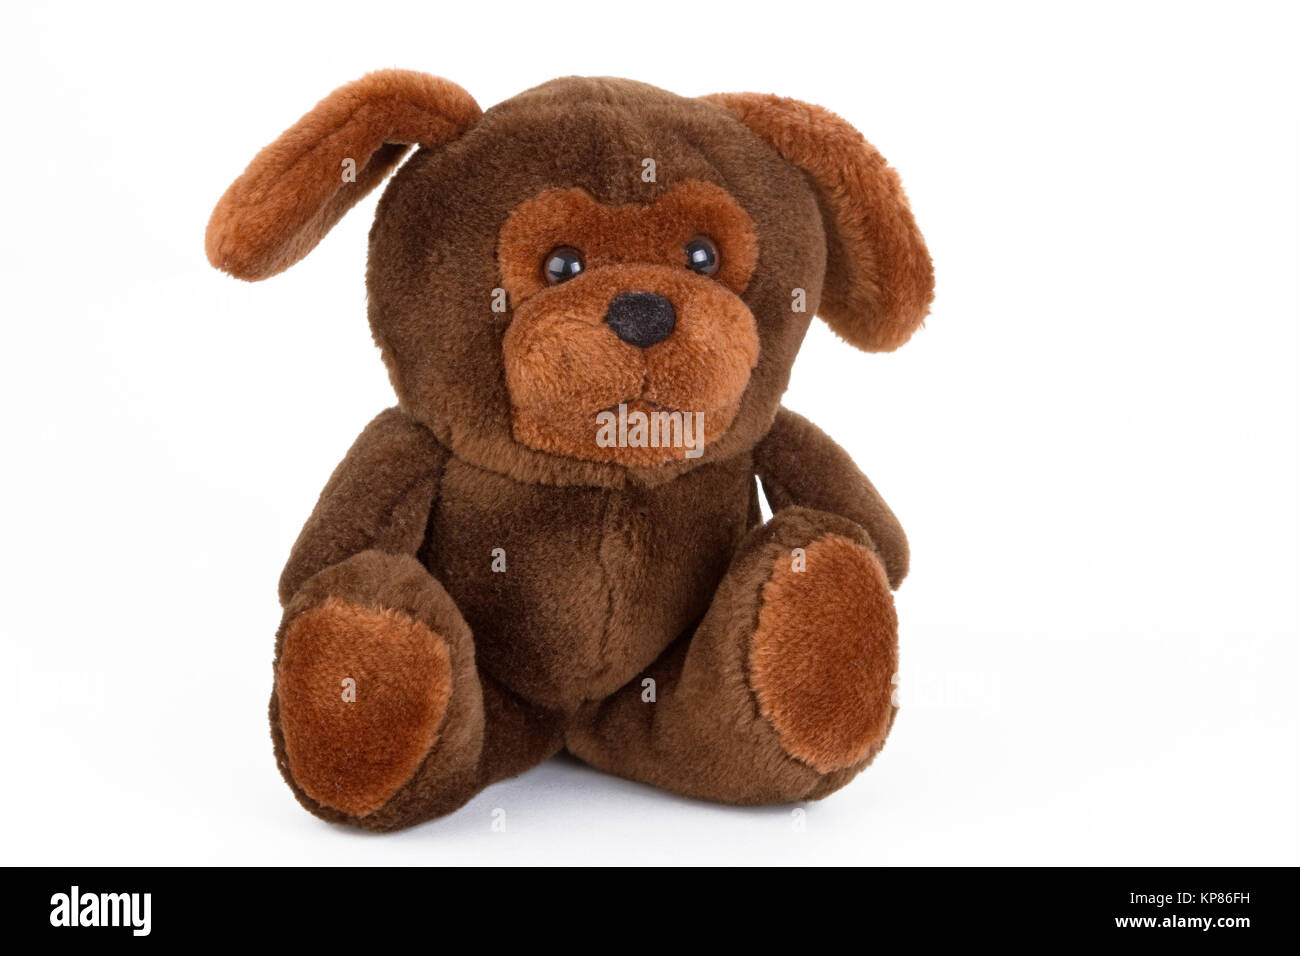 stuffed animal released on a white background Stock Photo